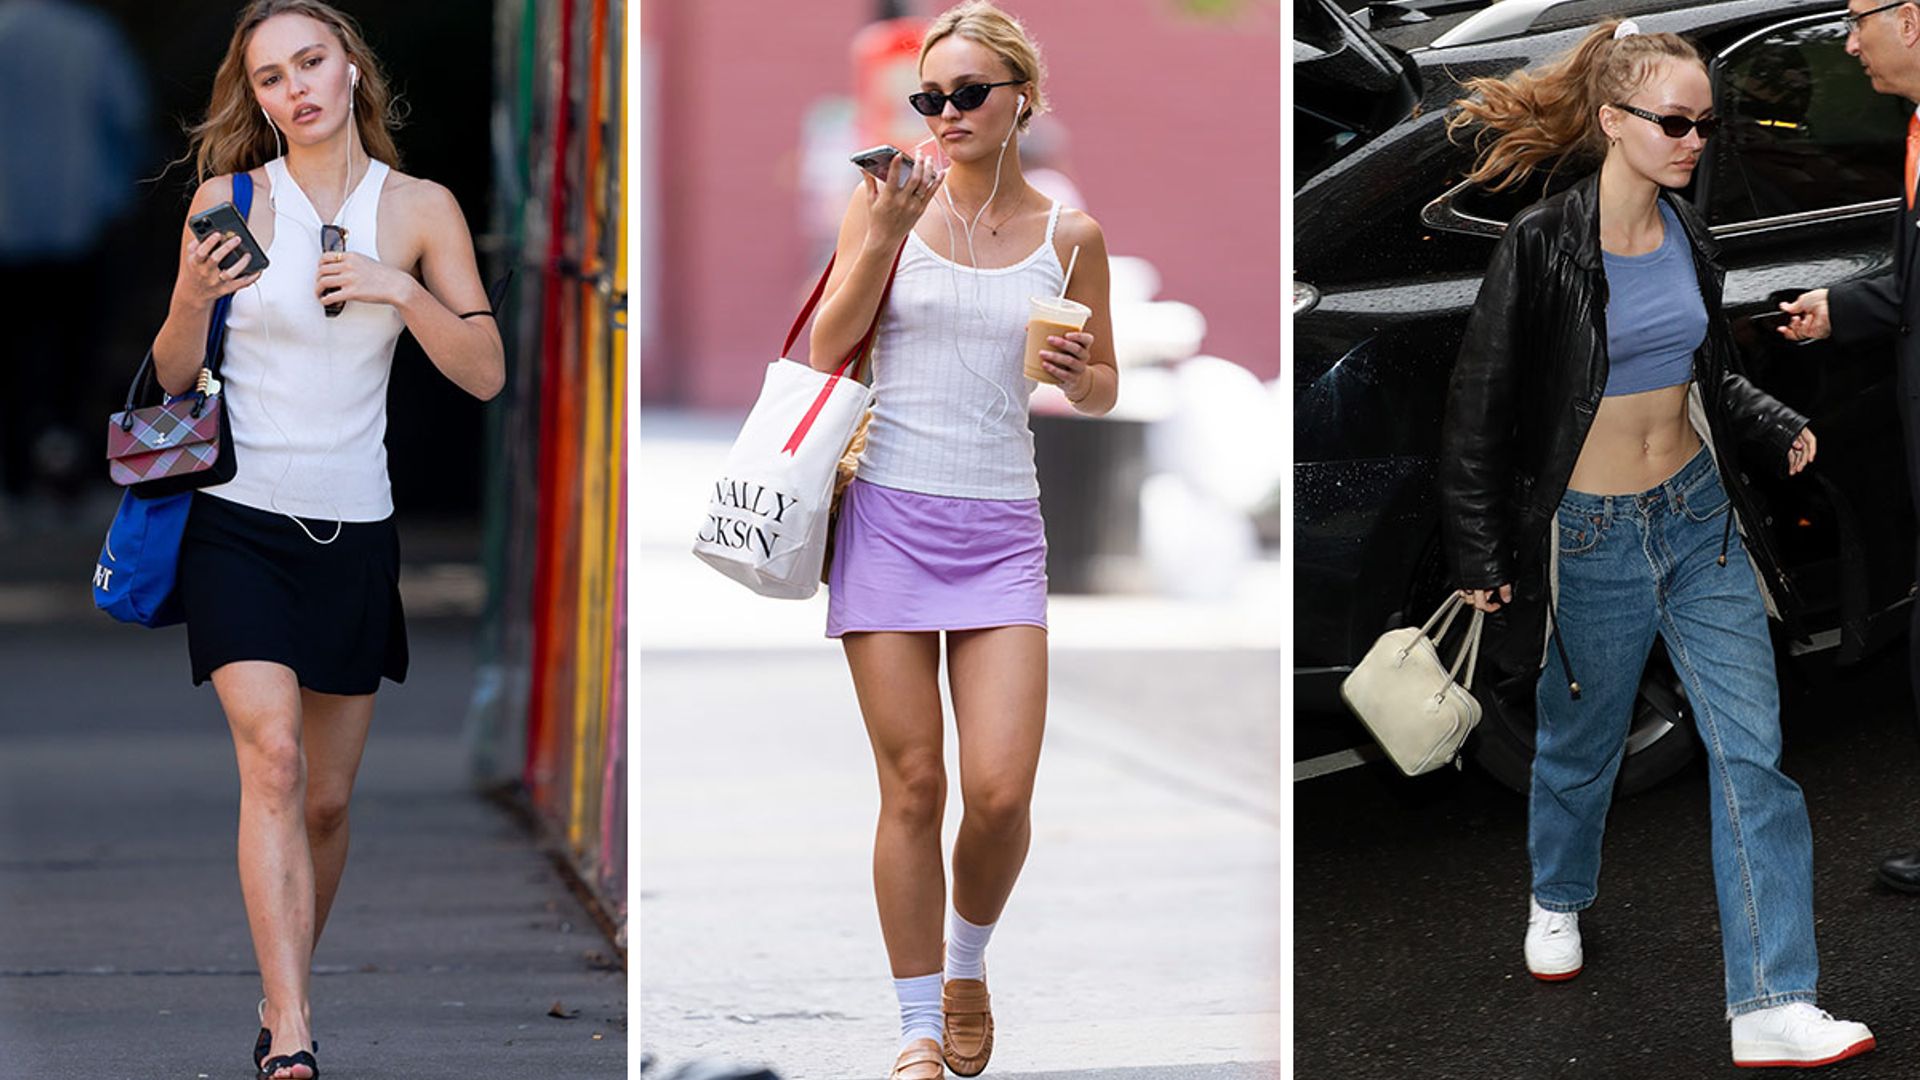 Lily-Rose Depp's best street style looks – see photos